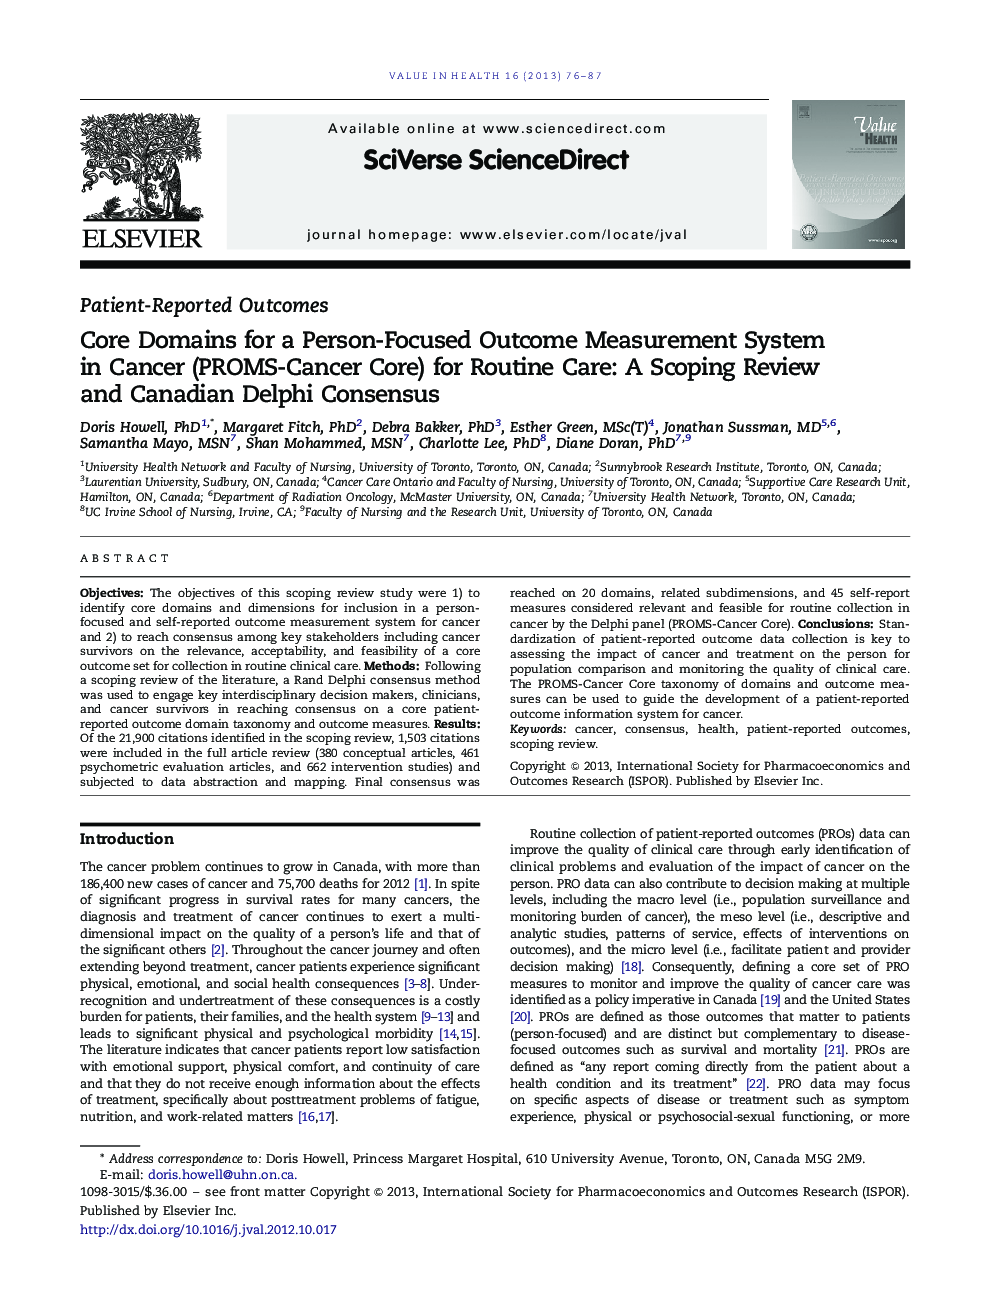 Core Domains for a Person-Focused Outcome Measurement System in Cancer (PROMS-Cancer Core) for Routine Care: A Scoping Review and Canadian Delphi Consensus